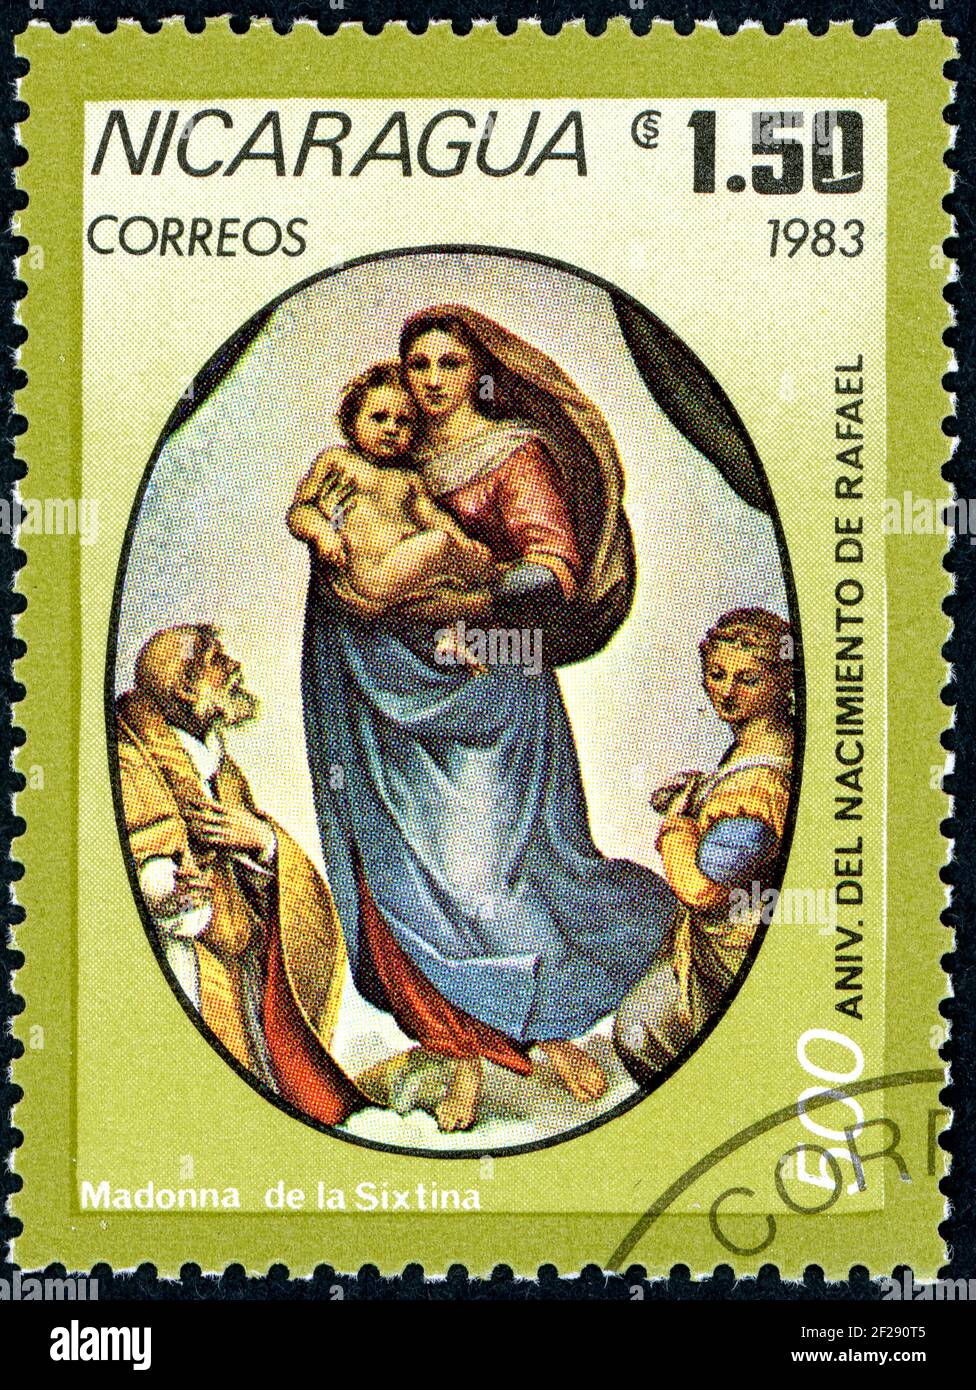 NICARAGUA - CIRCA 1983: A stamp printed in Nicaragua, shown the painting by Raphael - Sistine Madonna, circa 1983 Stock Photo